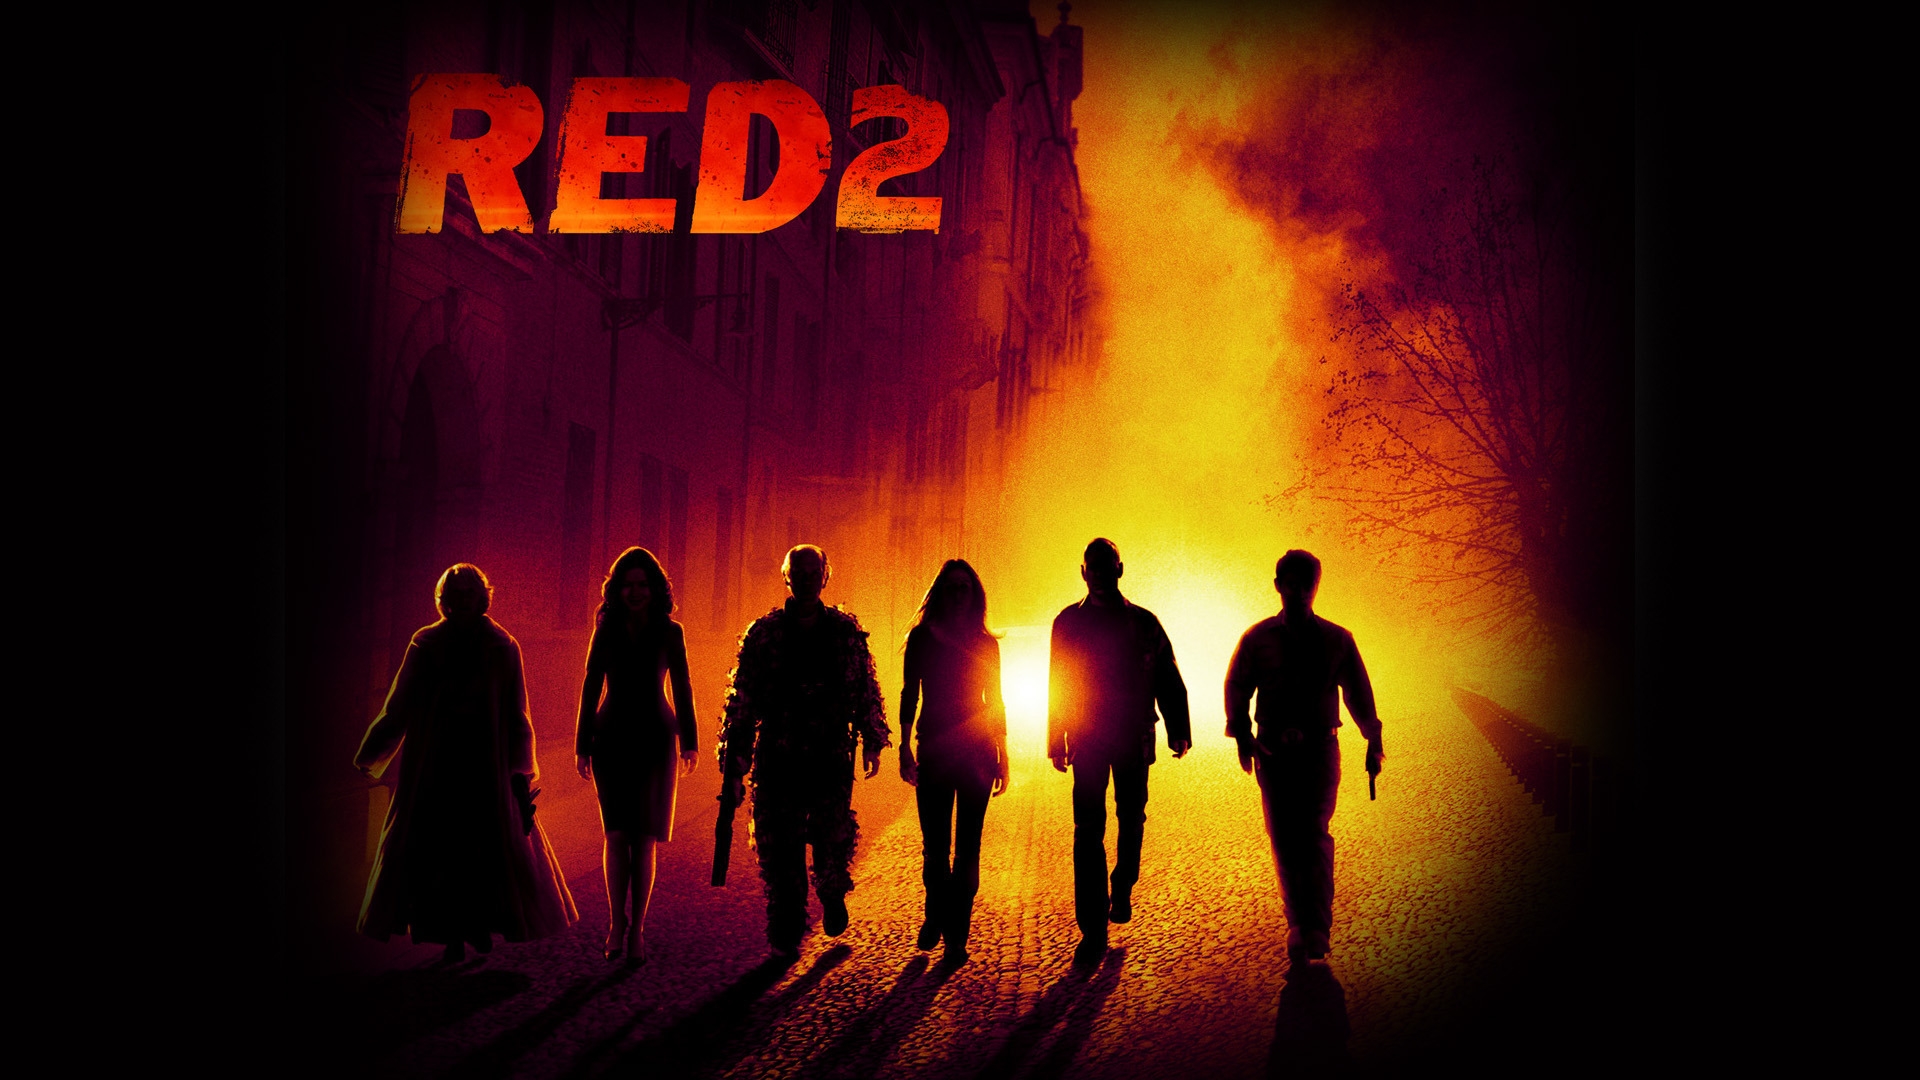 2013 RED 2 for 1920 x 1080 HDTV 1080p resolution